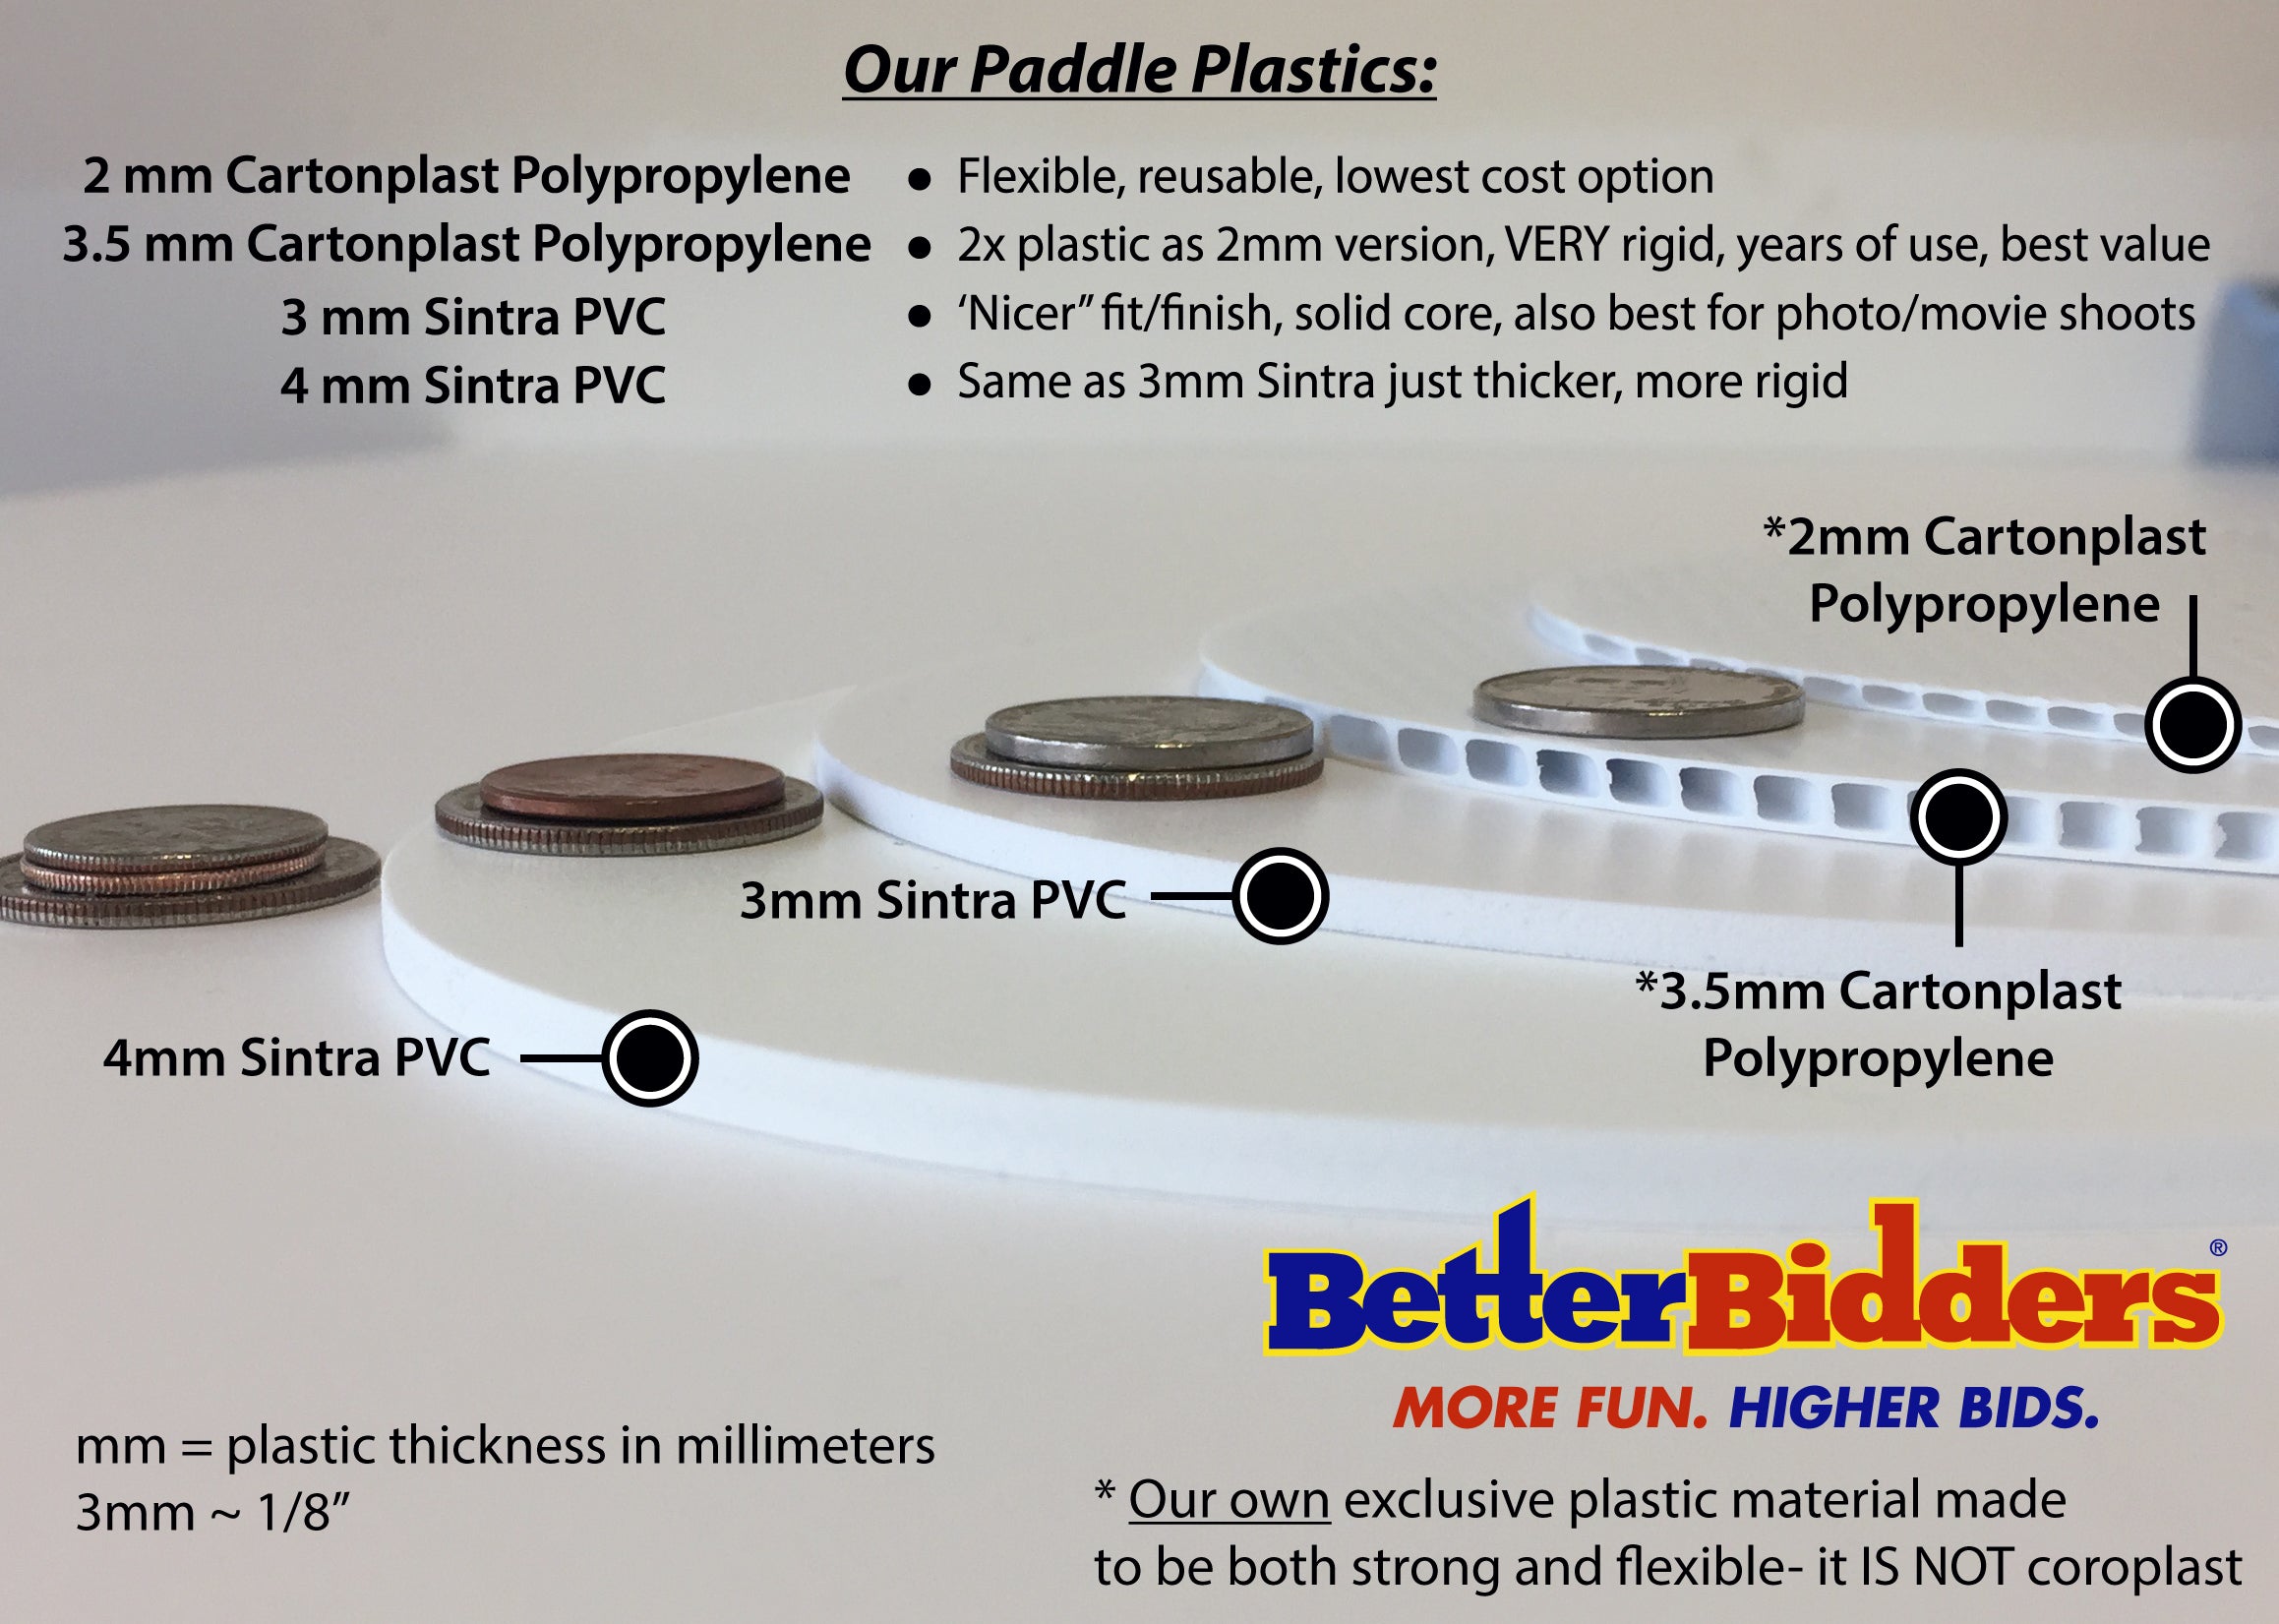 2mm Cartonplast, 3.5mm Cartonplast, 3mm Sintra (brand) PVC, 4mm Sintra (brand) PVC, Injection molded (High-Impact polystyrene) are all plastics we use to produce all of our rigid paddle and signage products. Better materials make for better products!